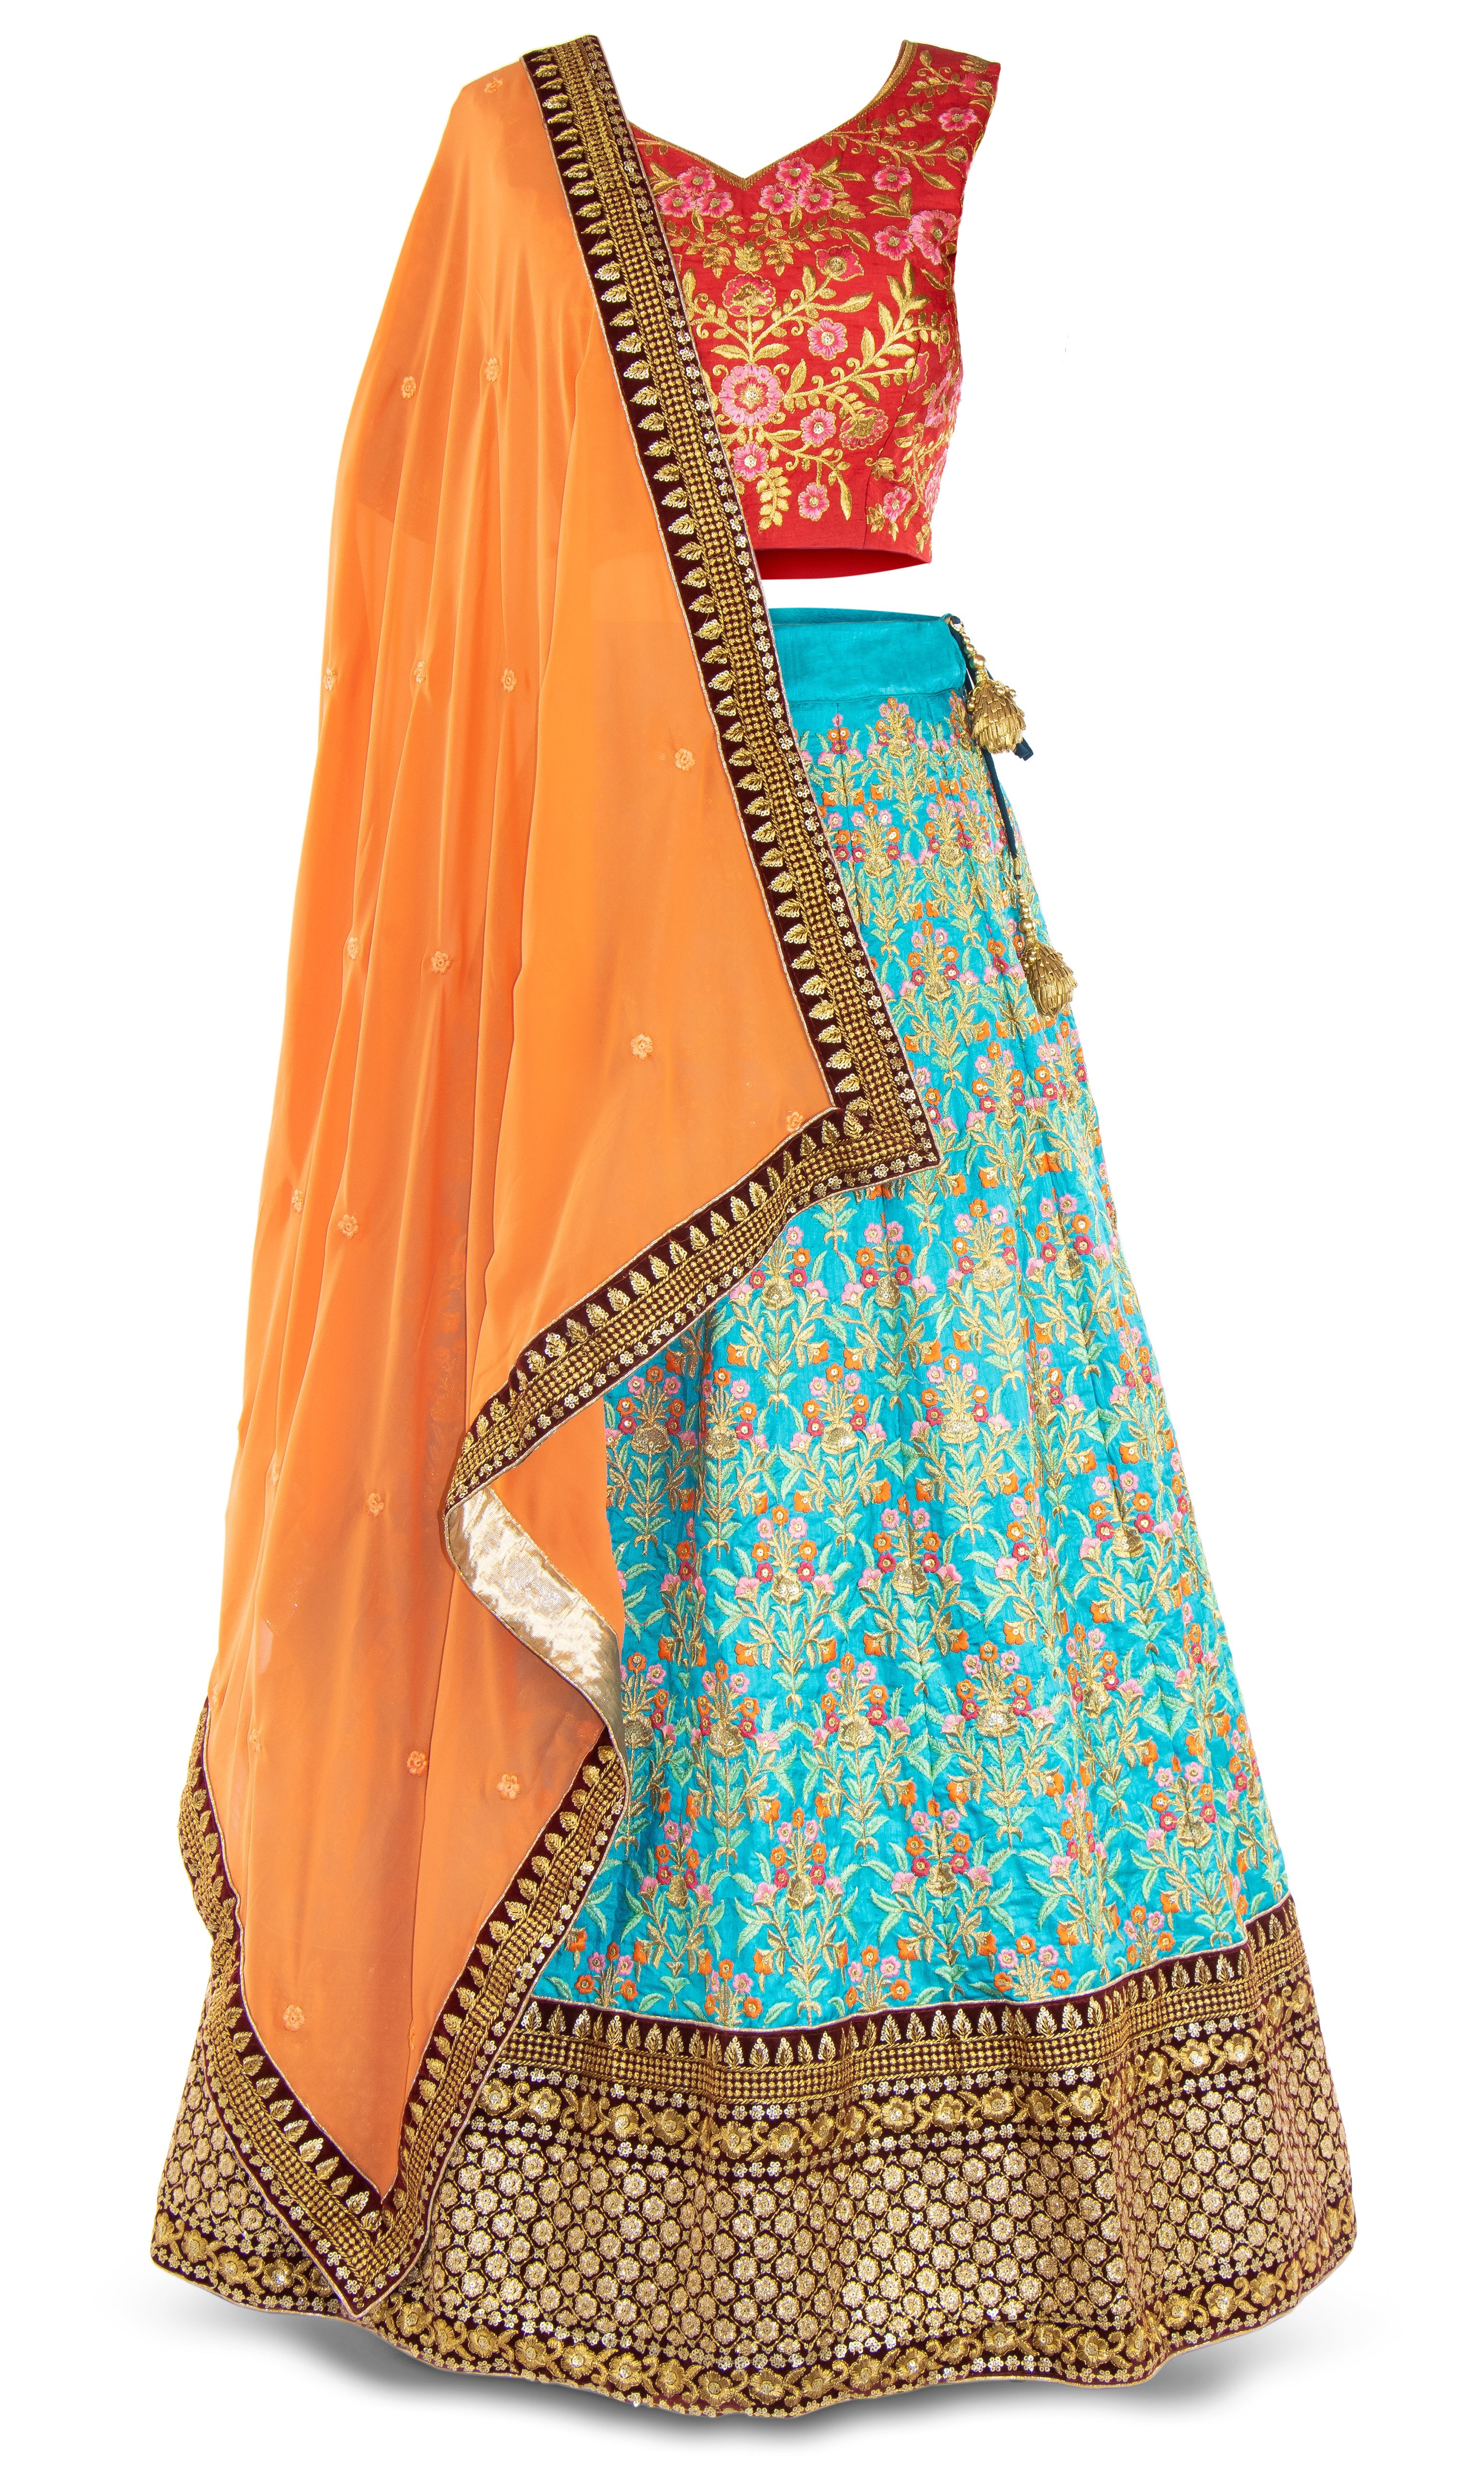 Contrasting blue lehenga A-line skirt embroidered with a kaleidoscope of florals and a gold tribal border.